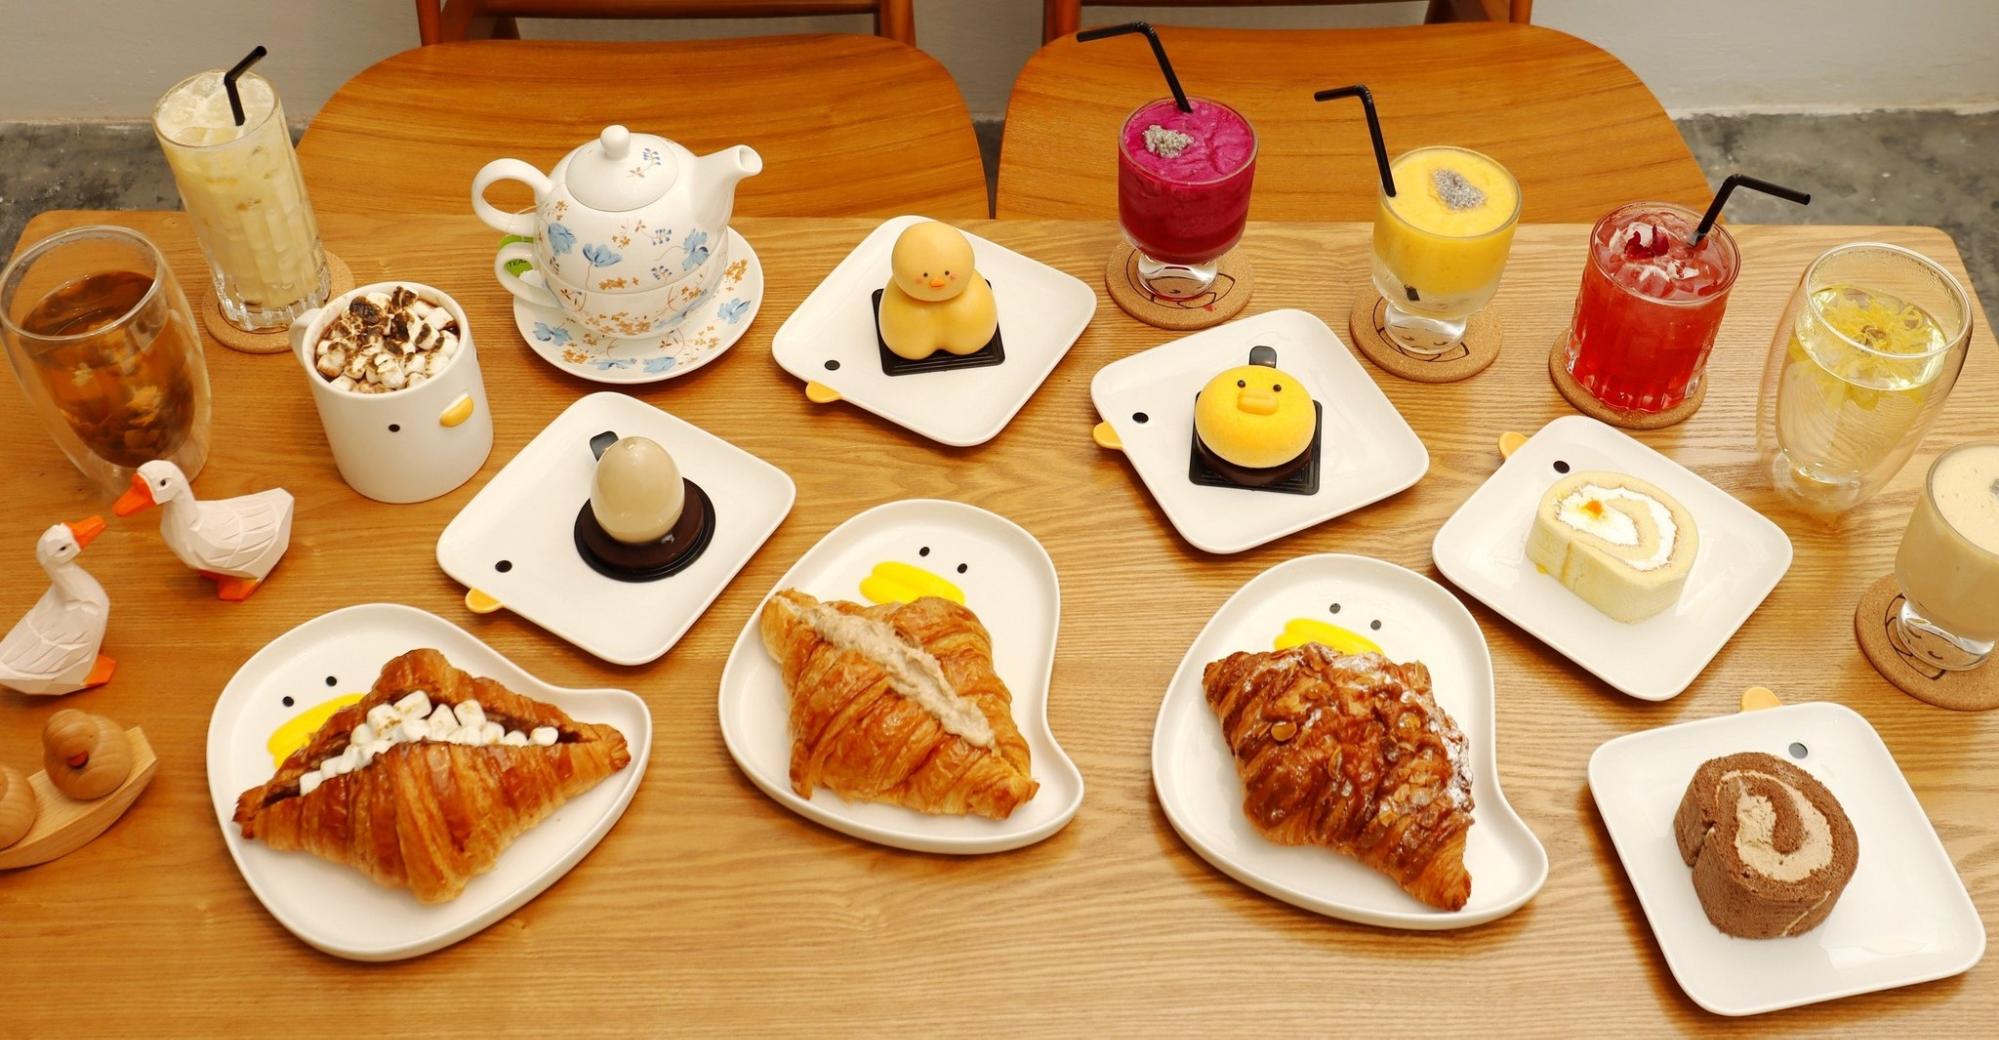 Pet Cafes in Malaysia - Callduck Coffee Shop food